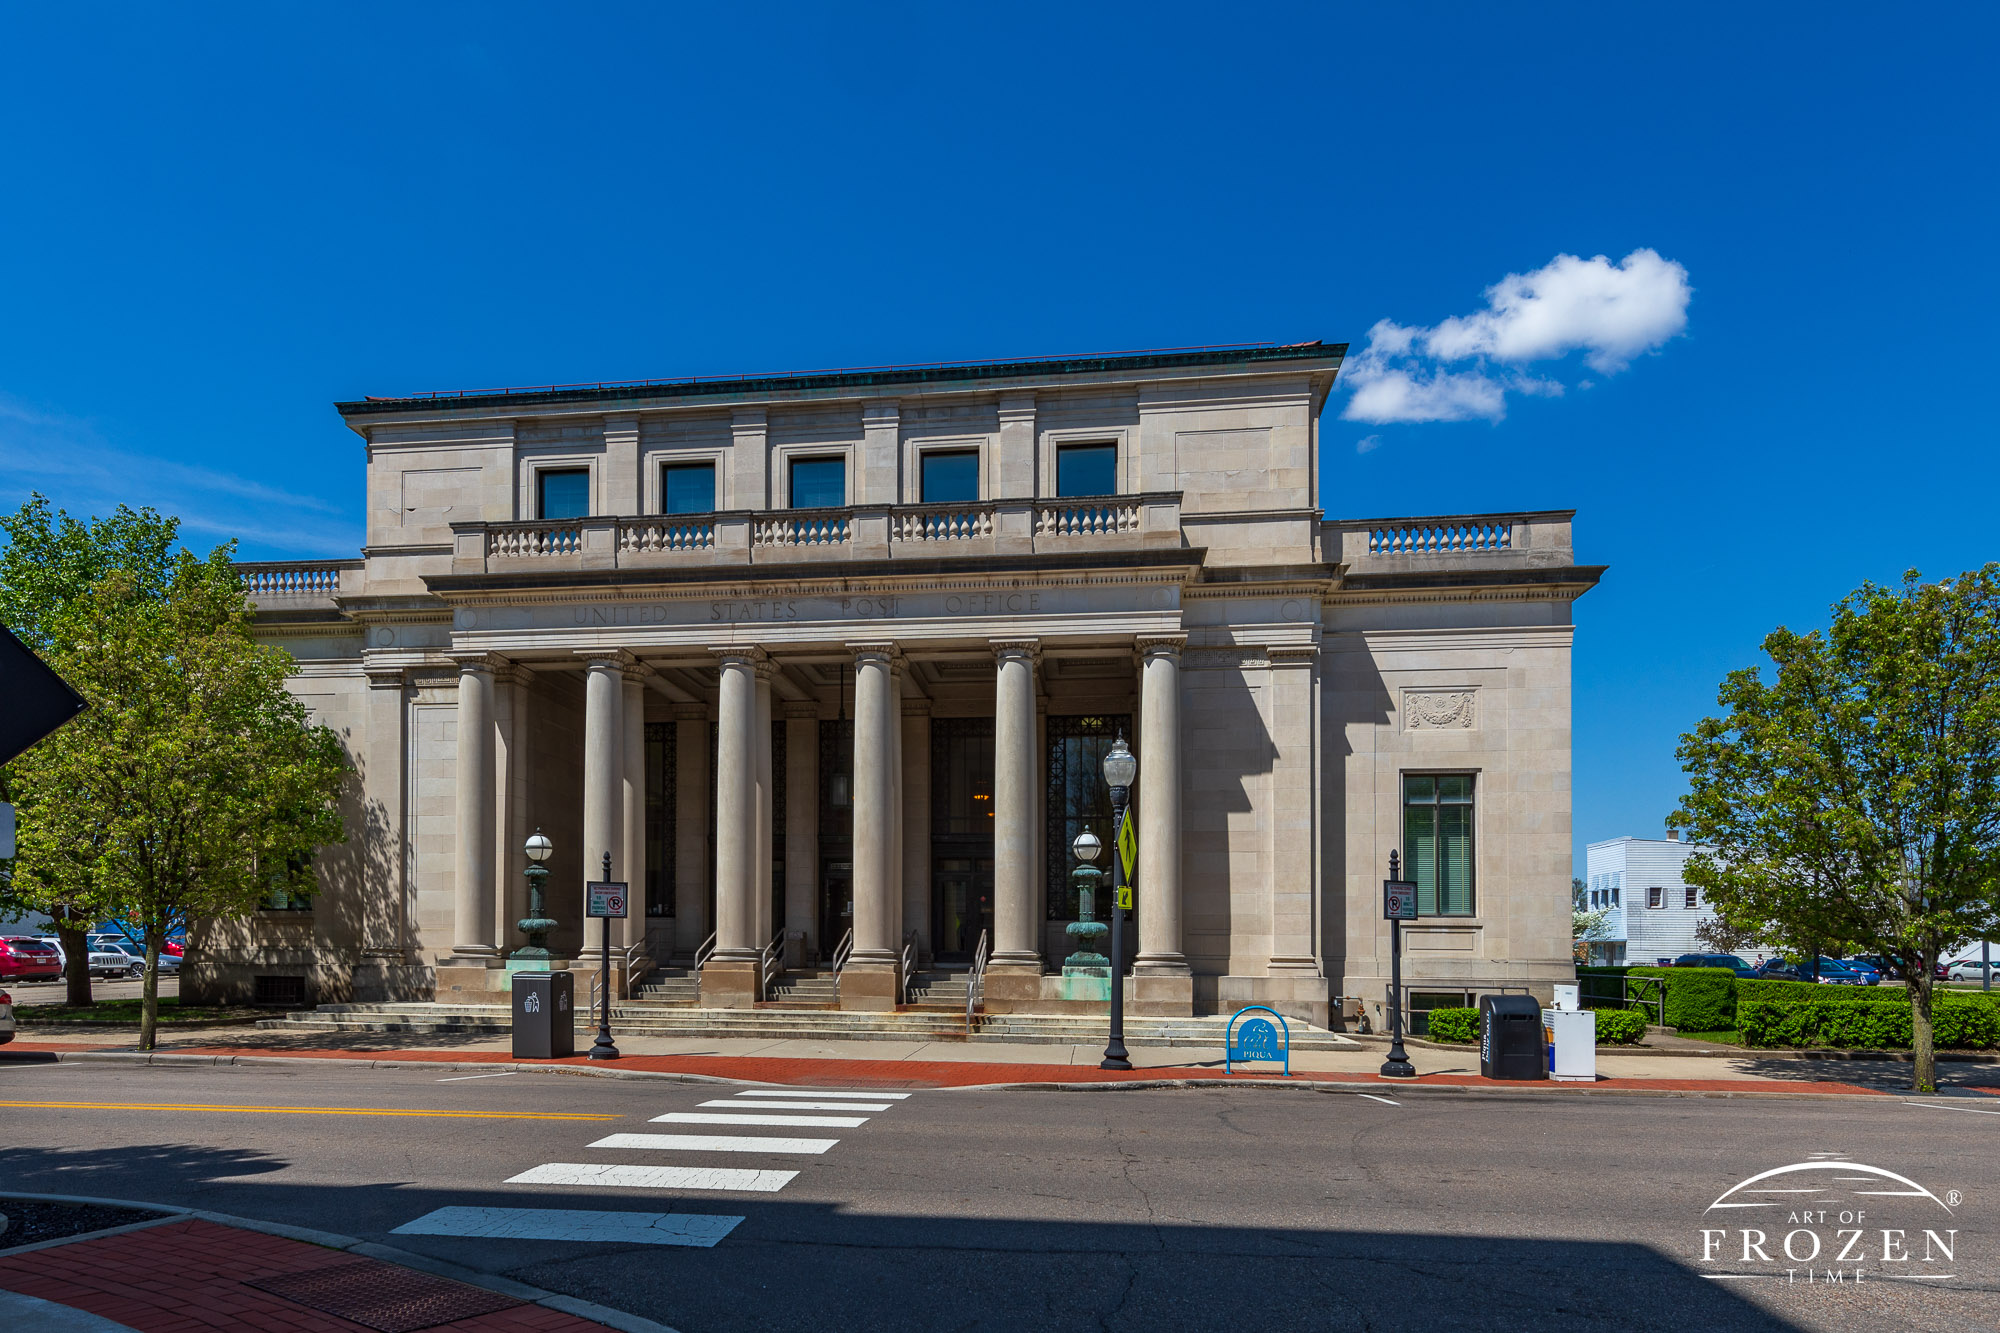 The Piqua Ohio Post Office front elevation which captures its Neo-Classical Revival Style using stone columns